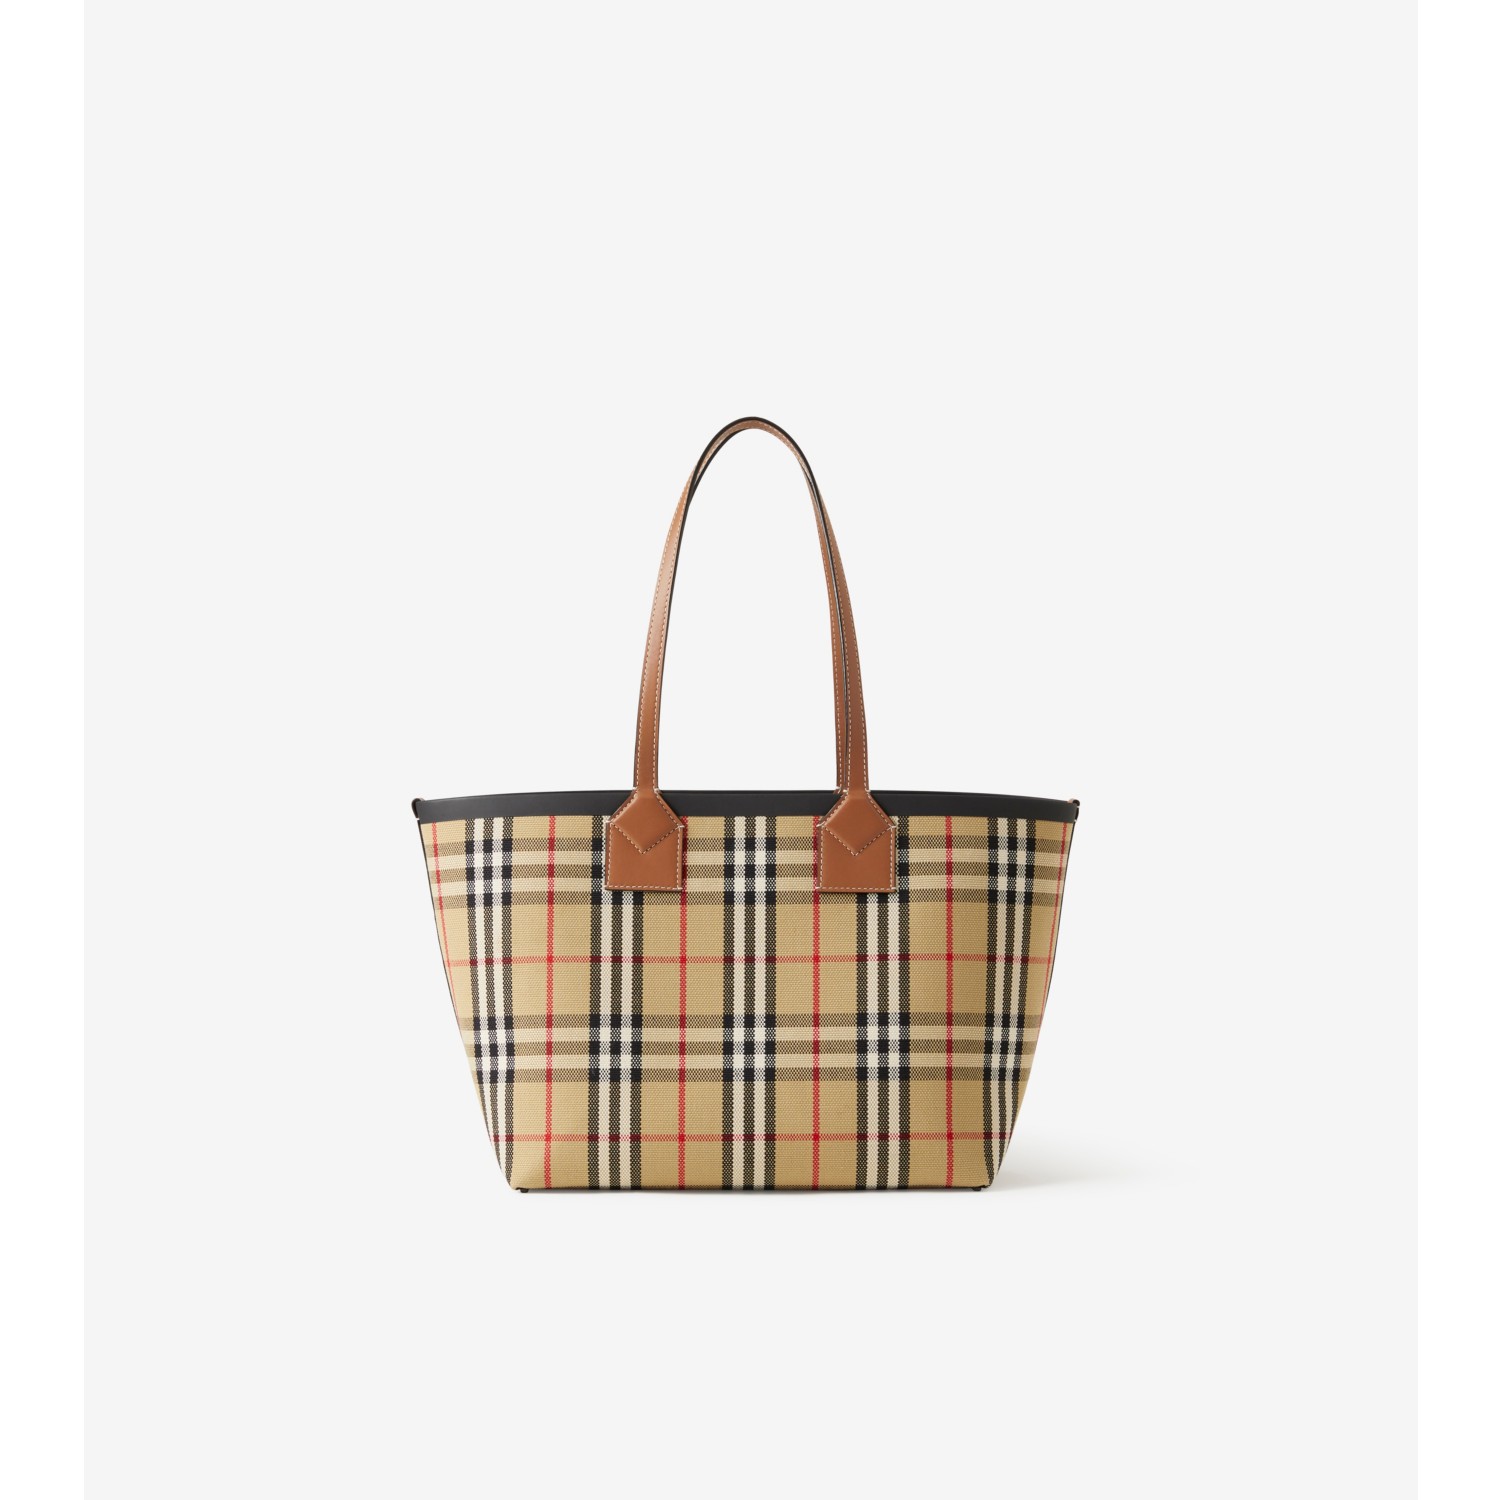 Vintage Burberry Nova Check Small Tote from Italy